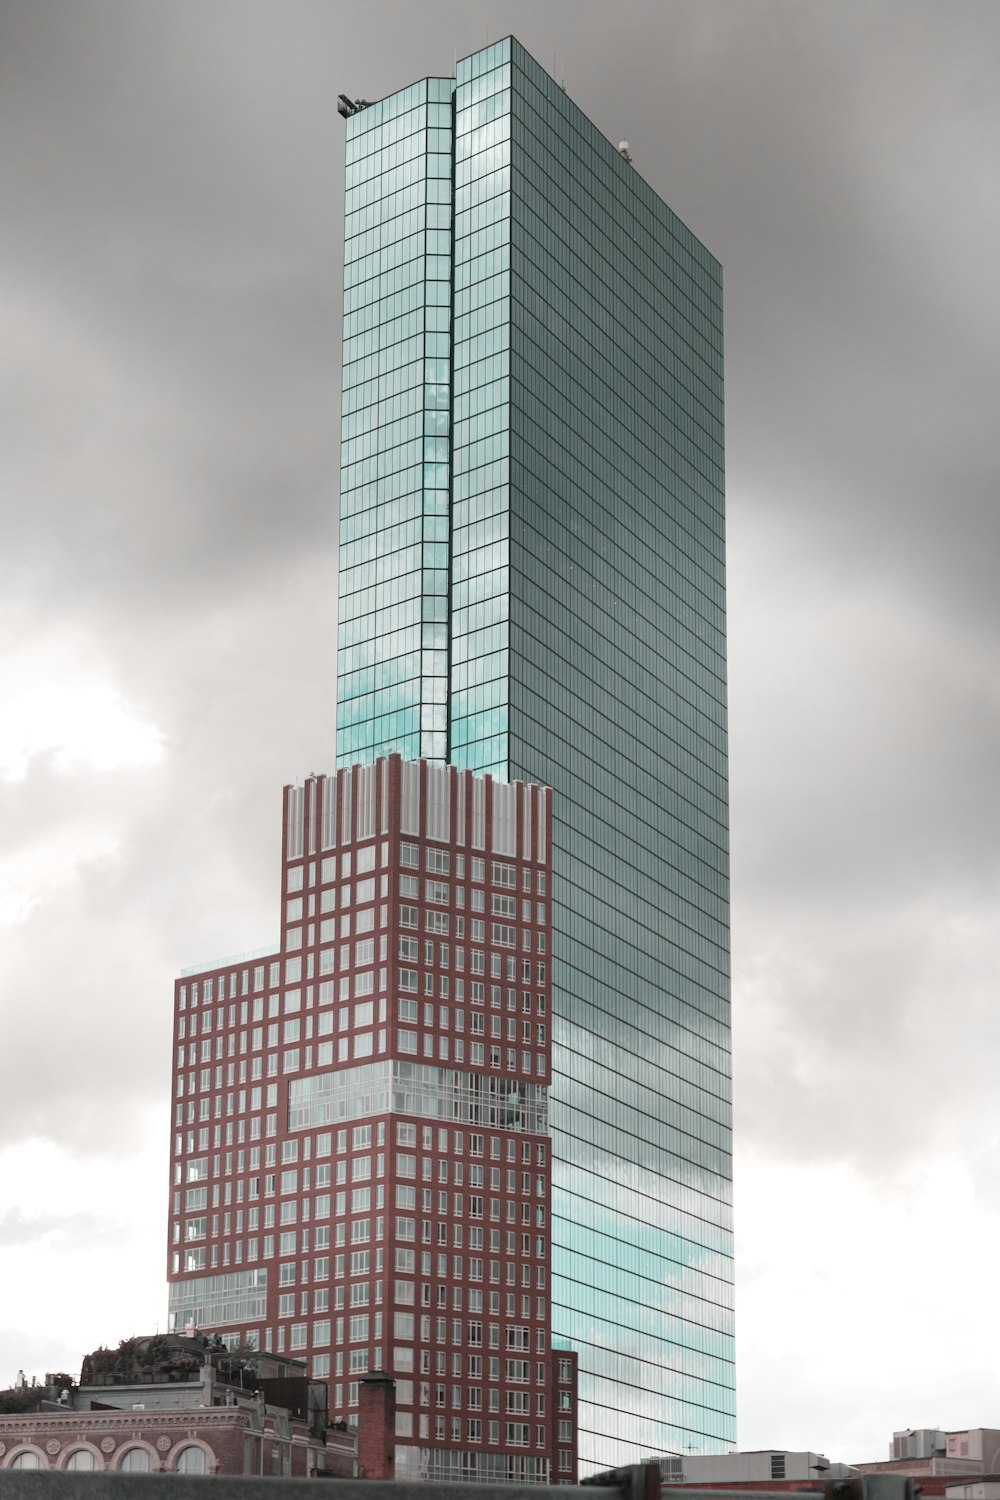 a very tall building with a sky background